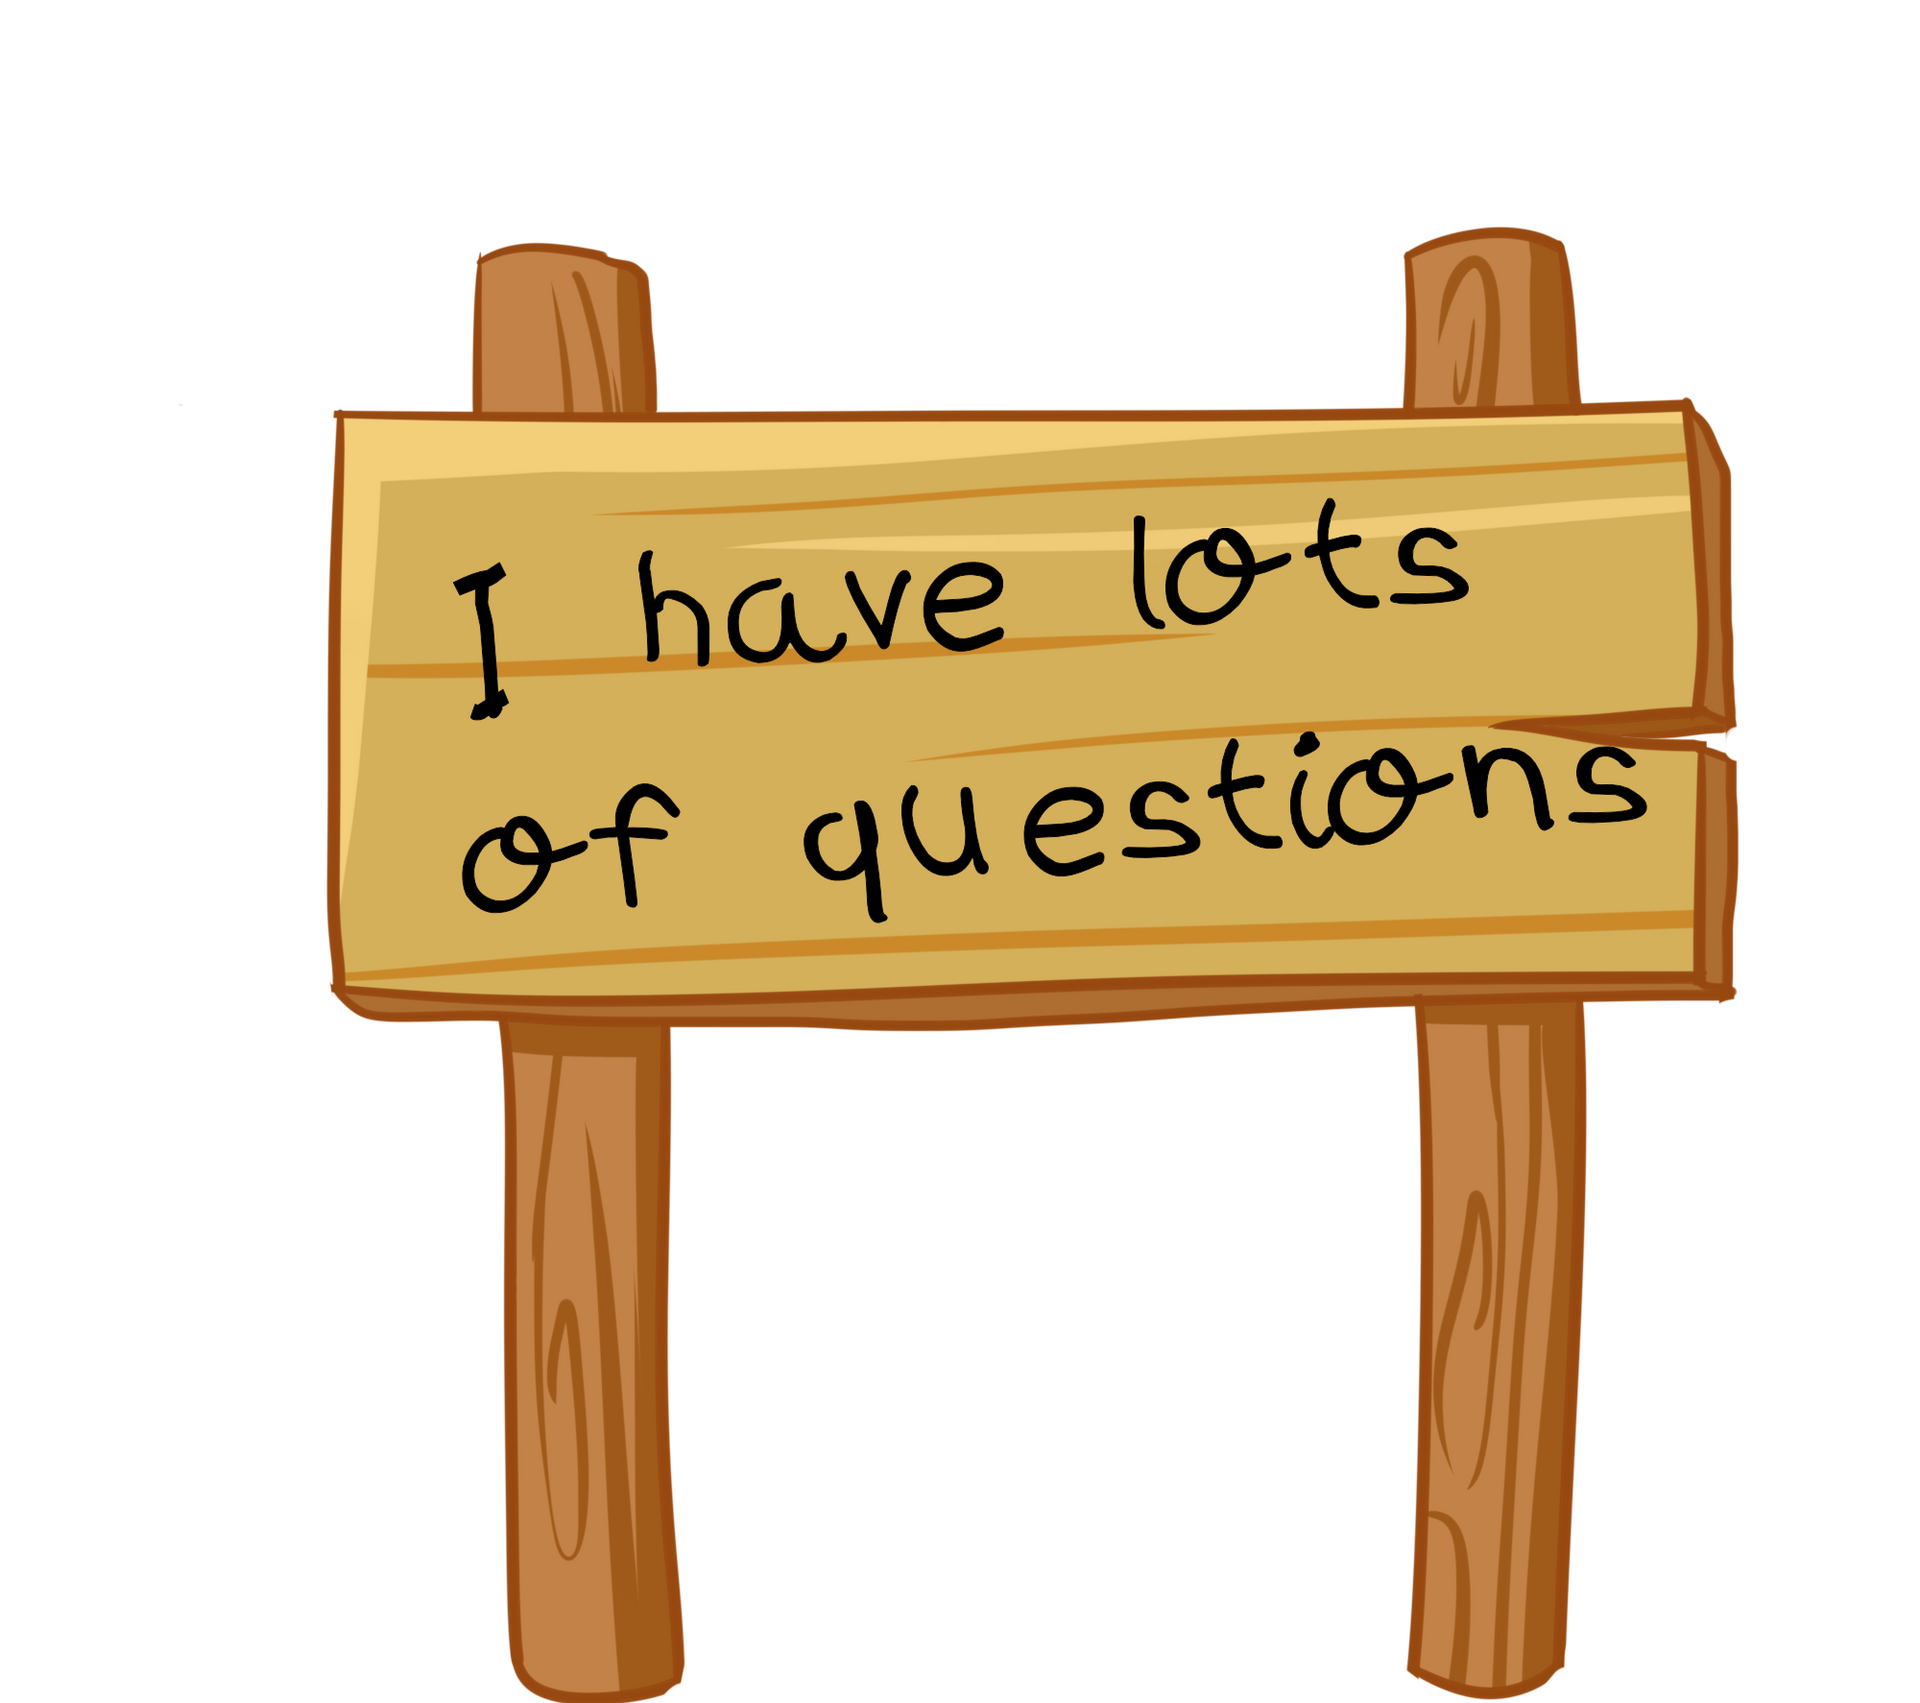 A wooden sign that says i have lots of questions